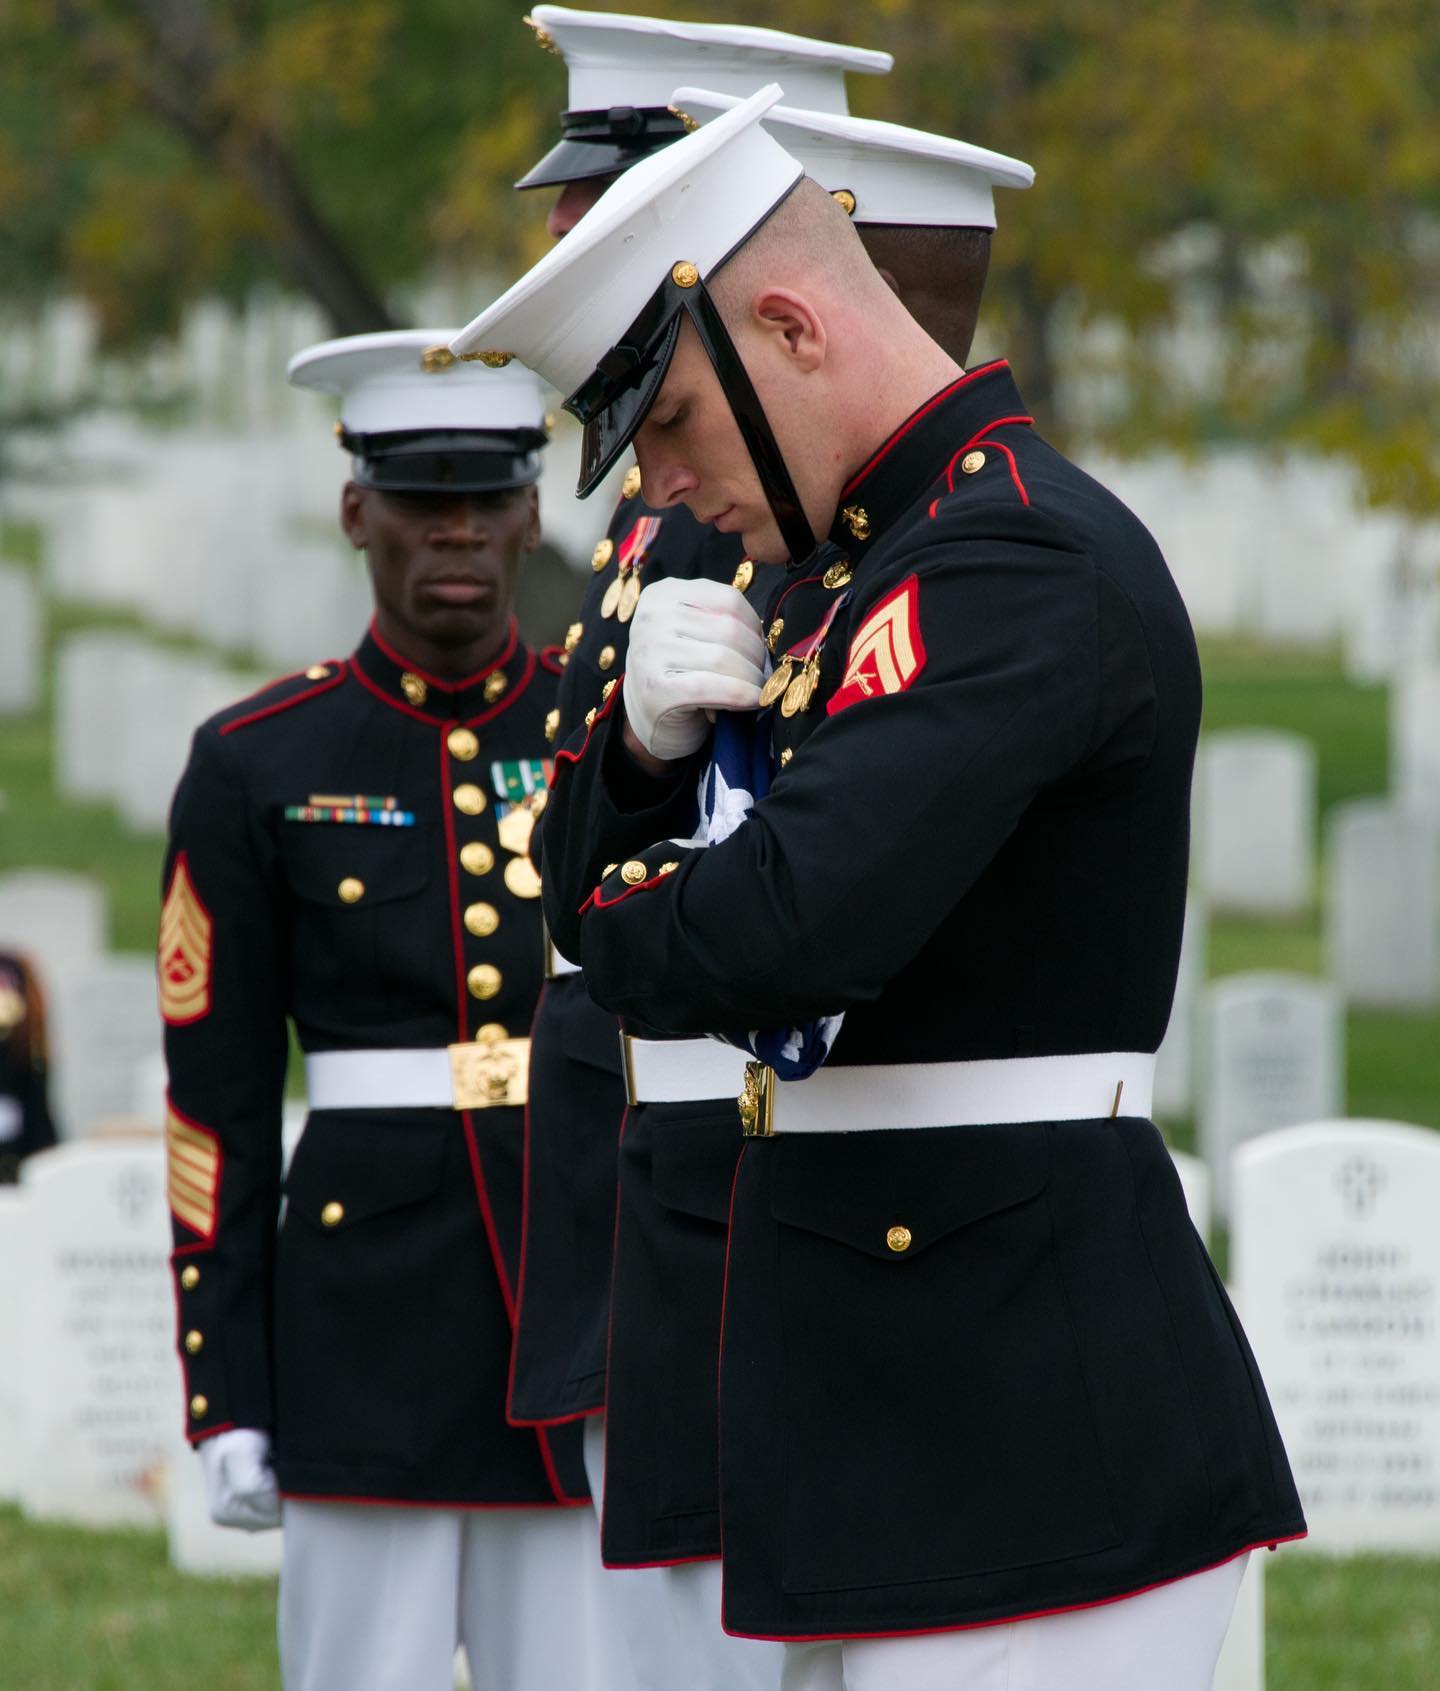 A member of the United States Marine Honor Guard inspects a carefully folded flag before passing it along at a military funeral at Arlington National Cemetery in Arlington, Virginia.